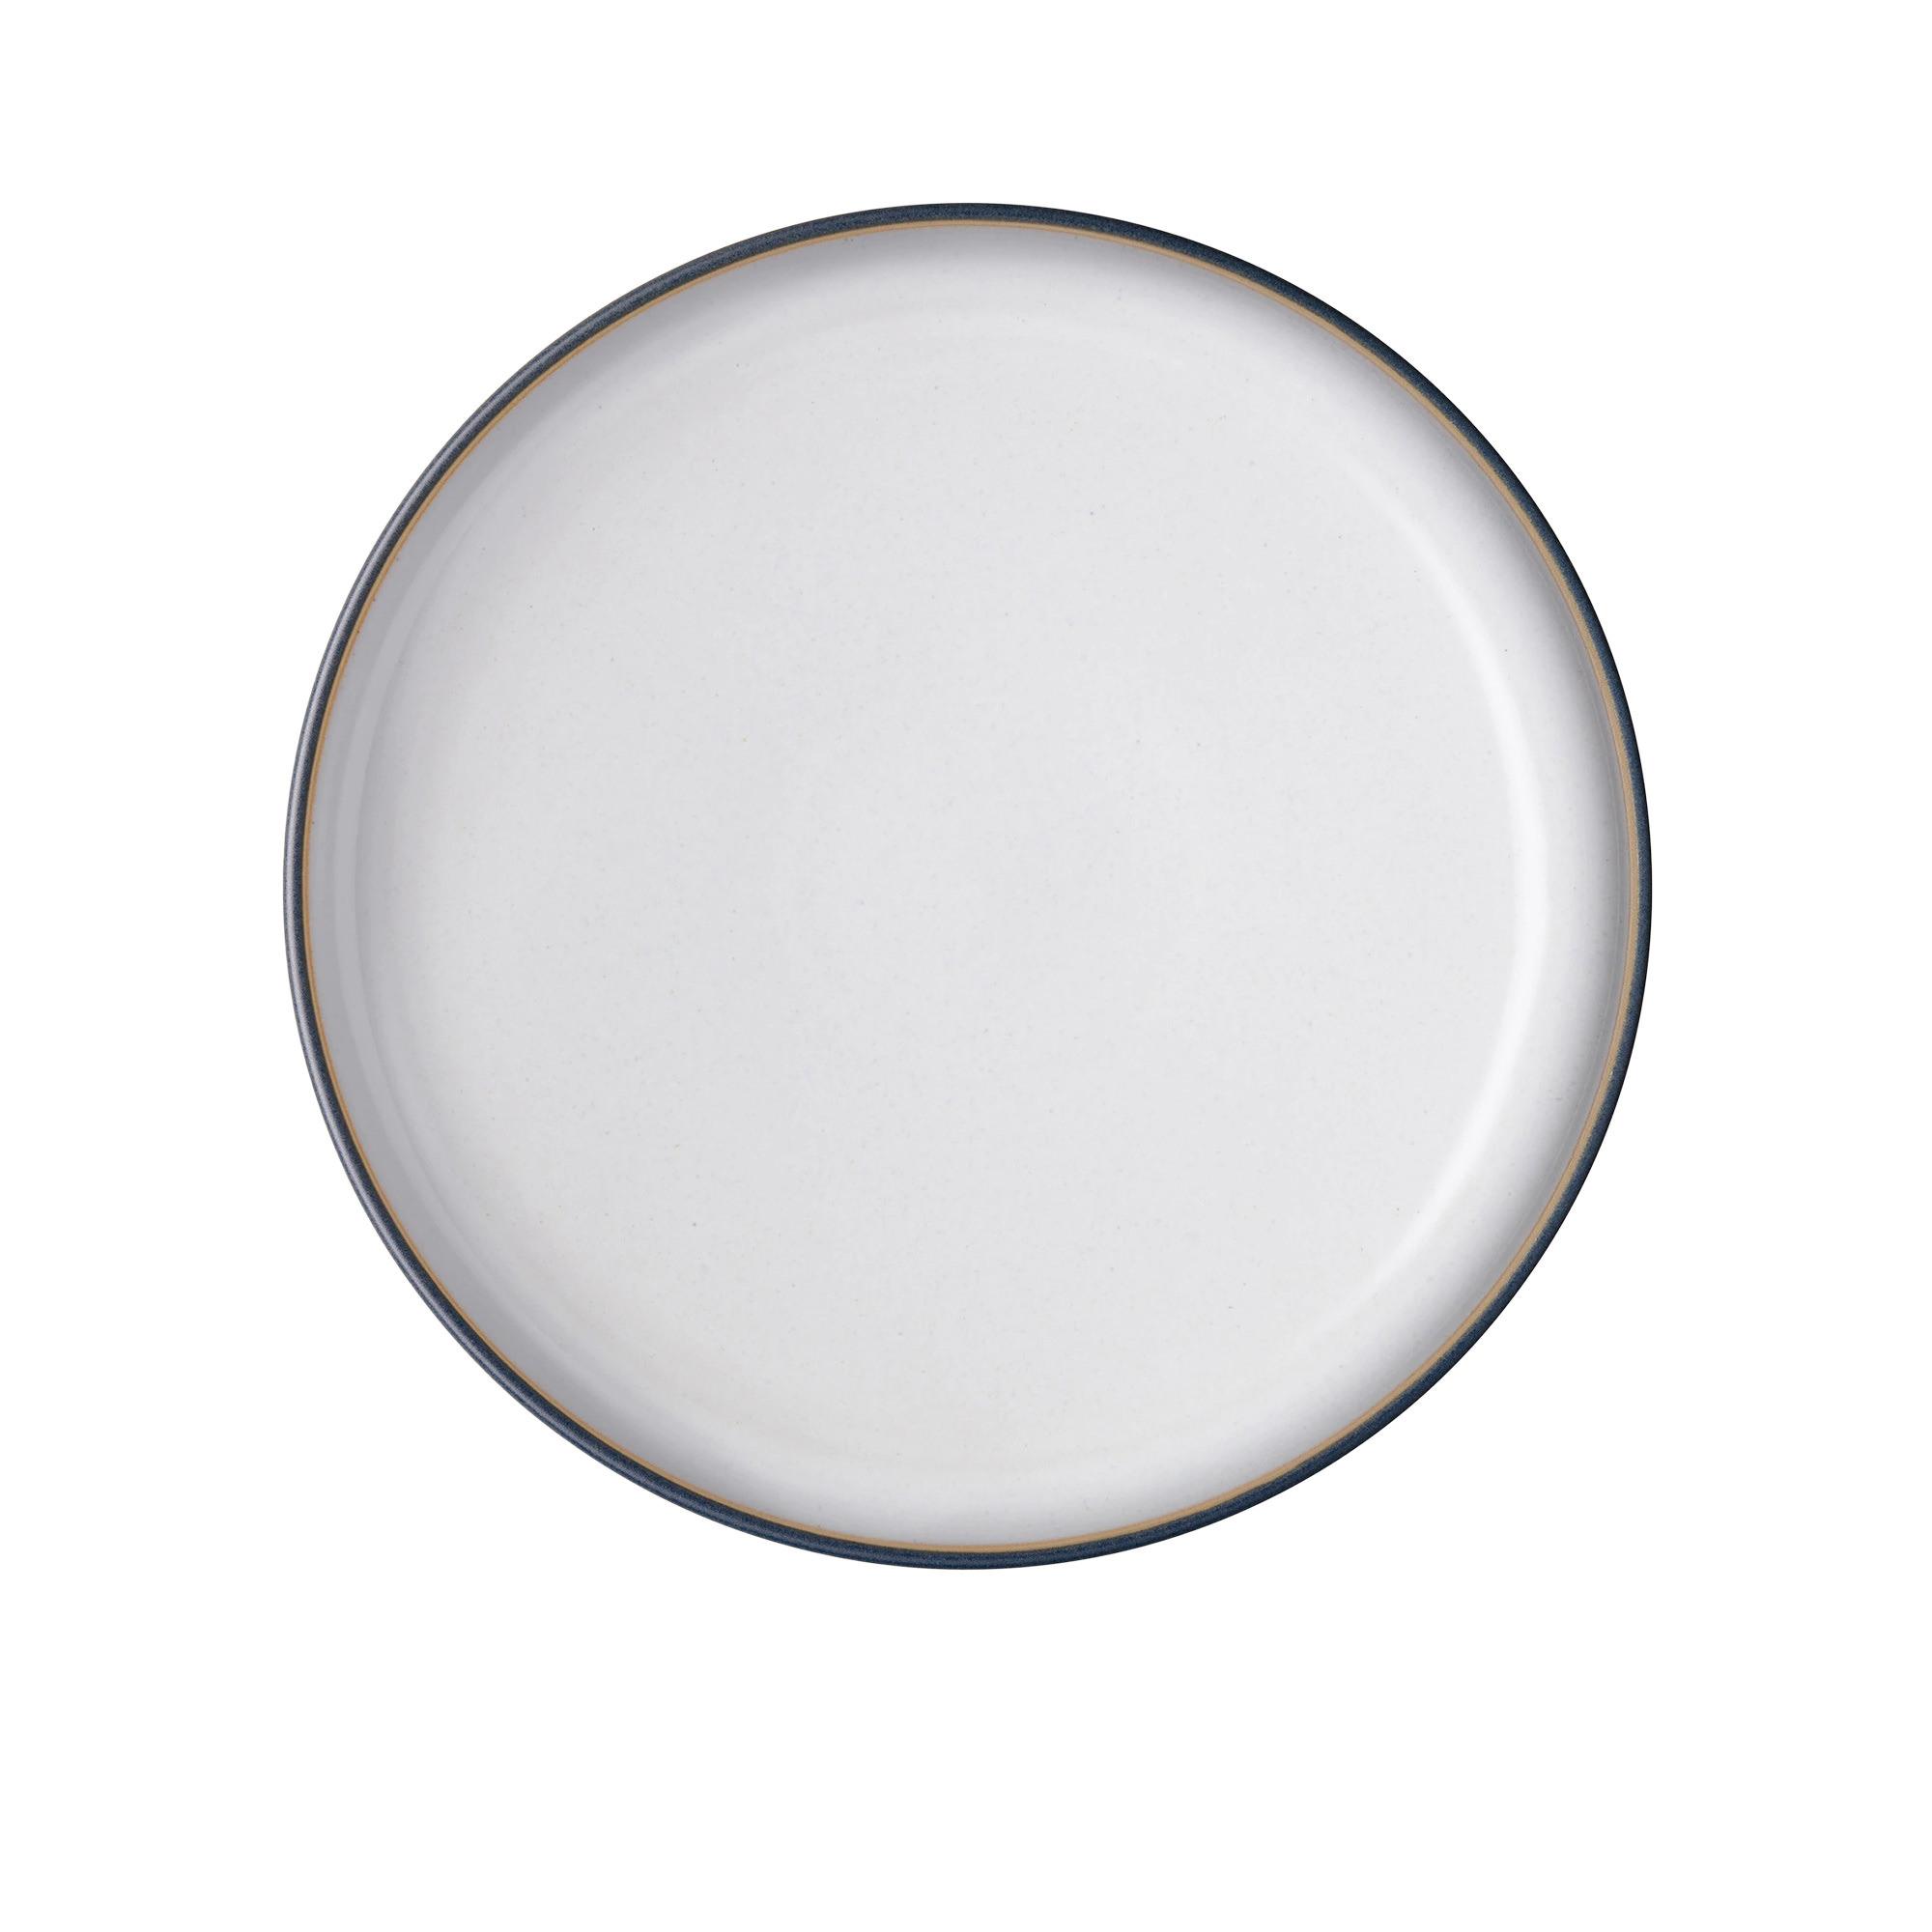 Denby Studio Grey Coupe Dinner Plate Set of 4 White Image 3